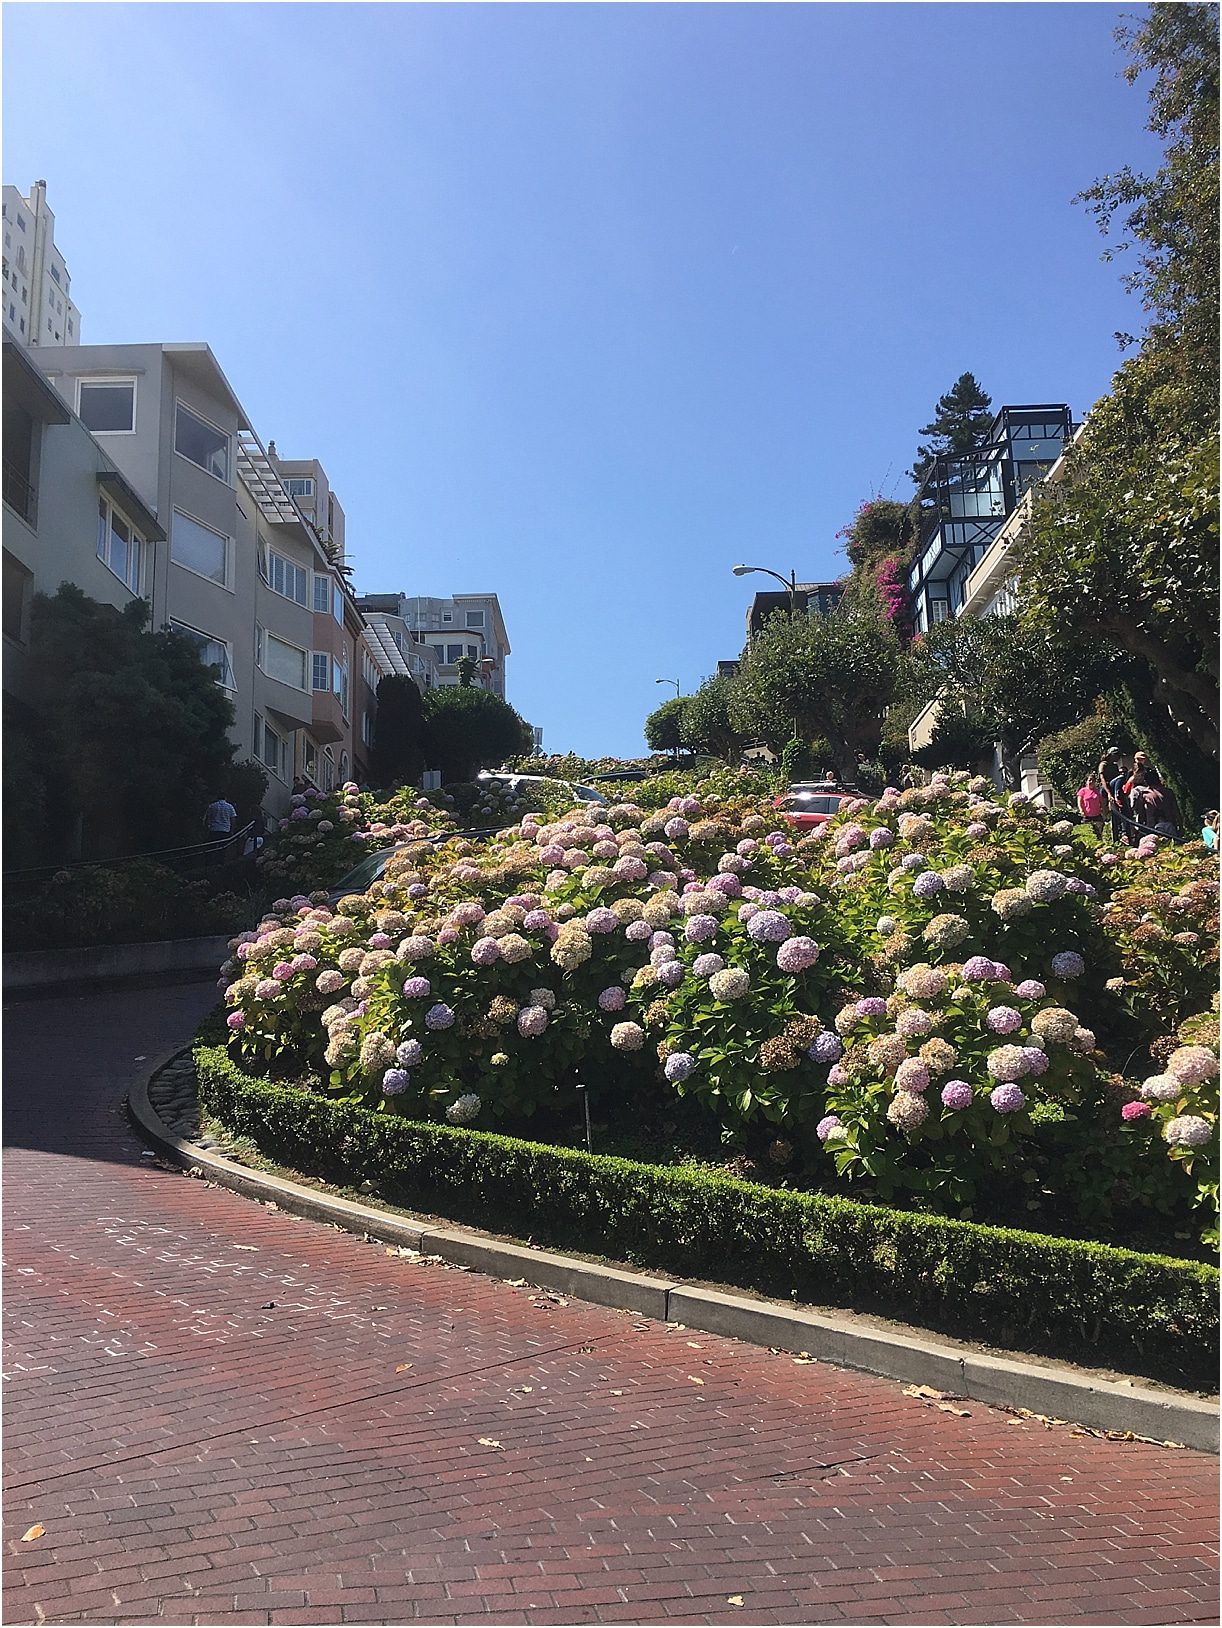 Hotel Griffon and San Francisco Walking Tour as seen on Hill City Bride Virginia Wedding Blog and Destination Travel View Looking up Lombard Street